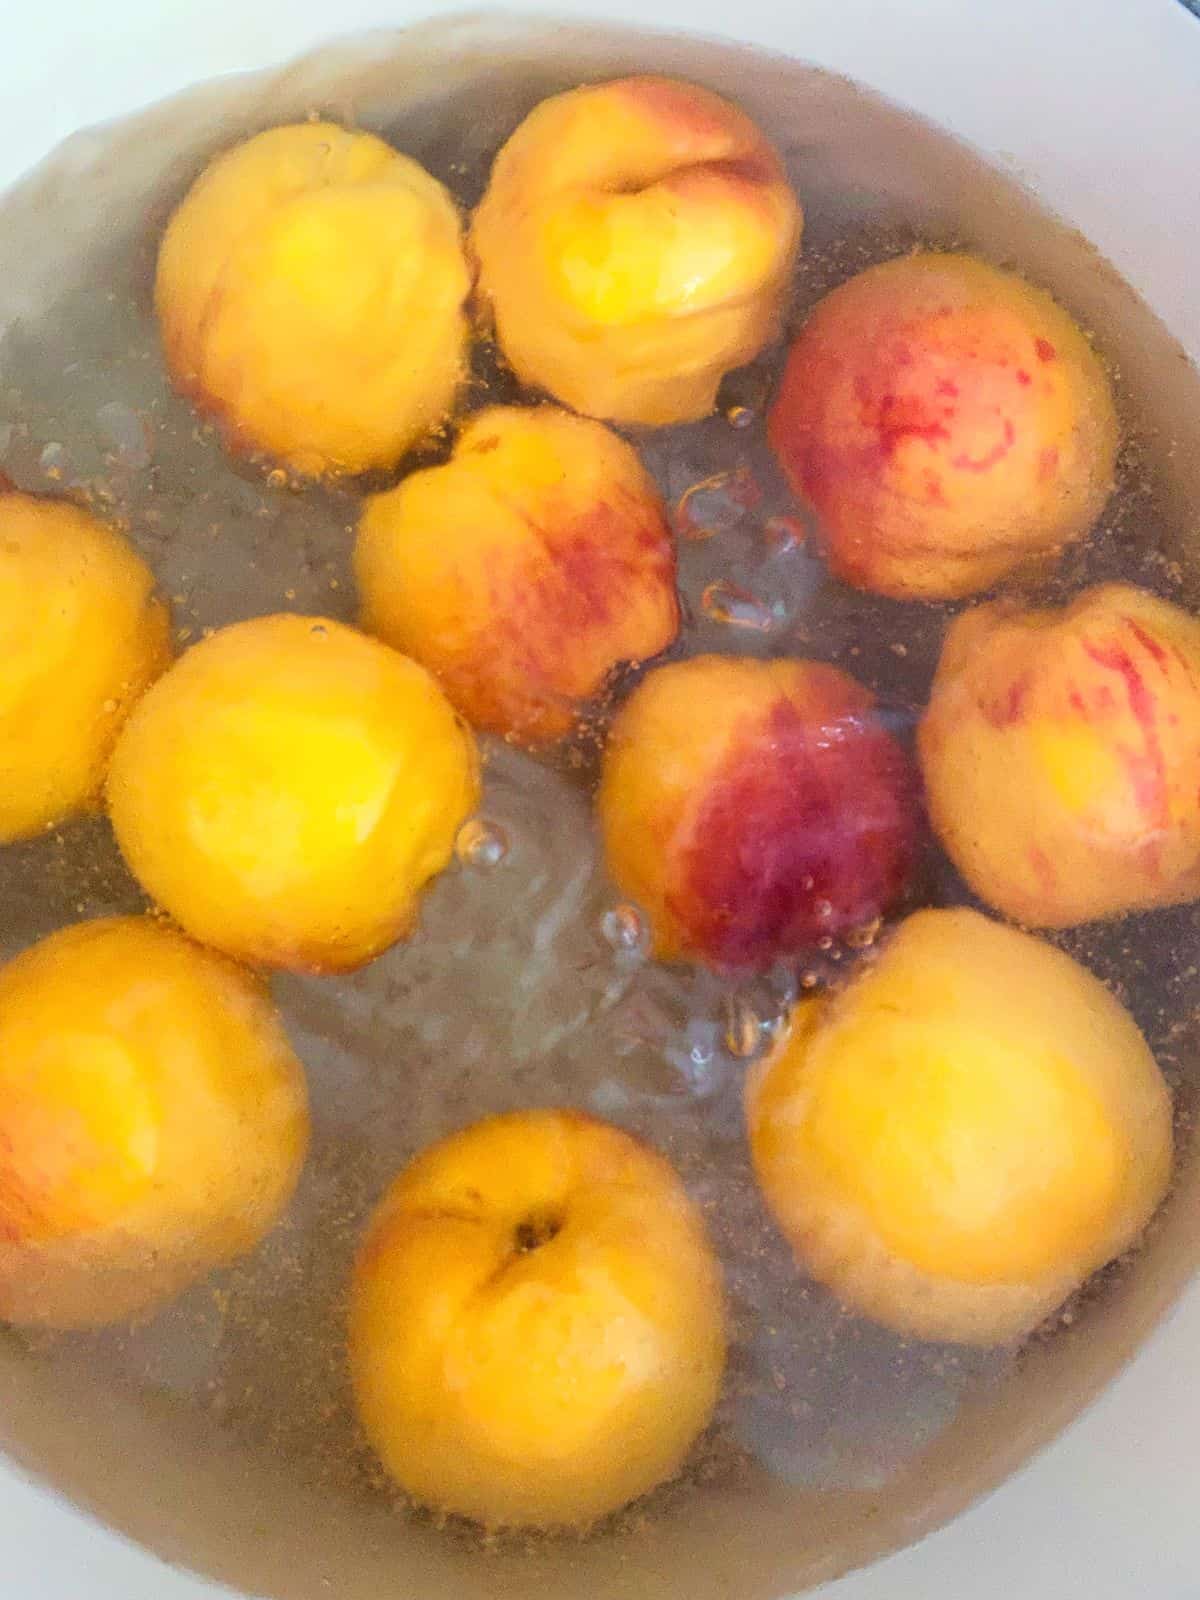 An image of peaches being blanched in a pot of boiling water.